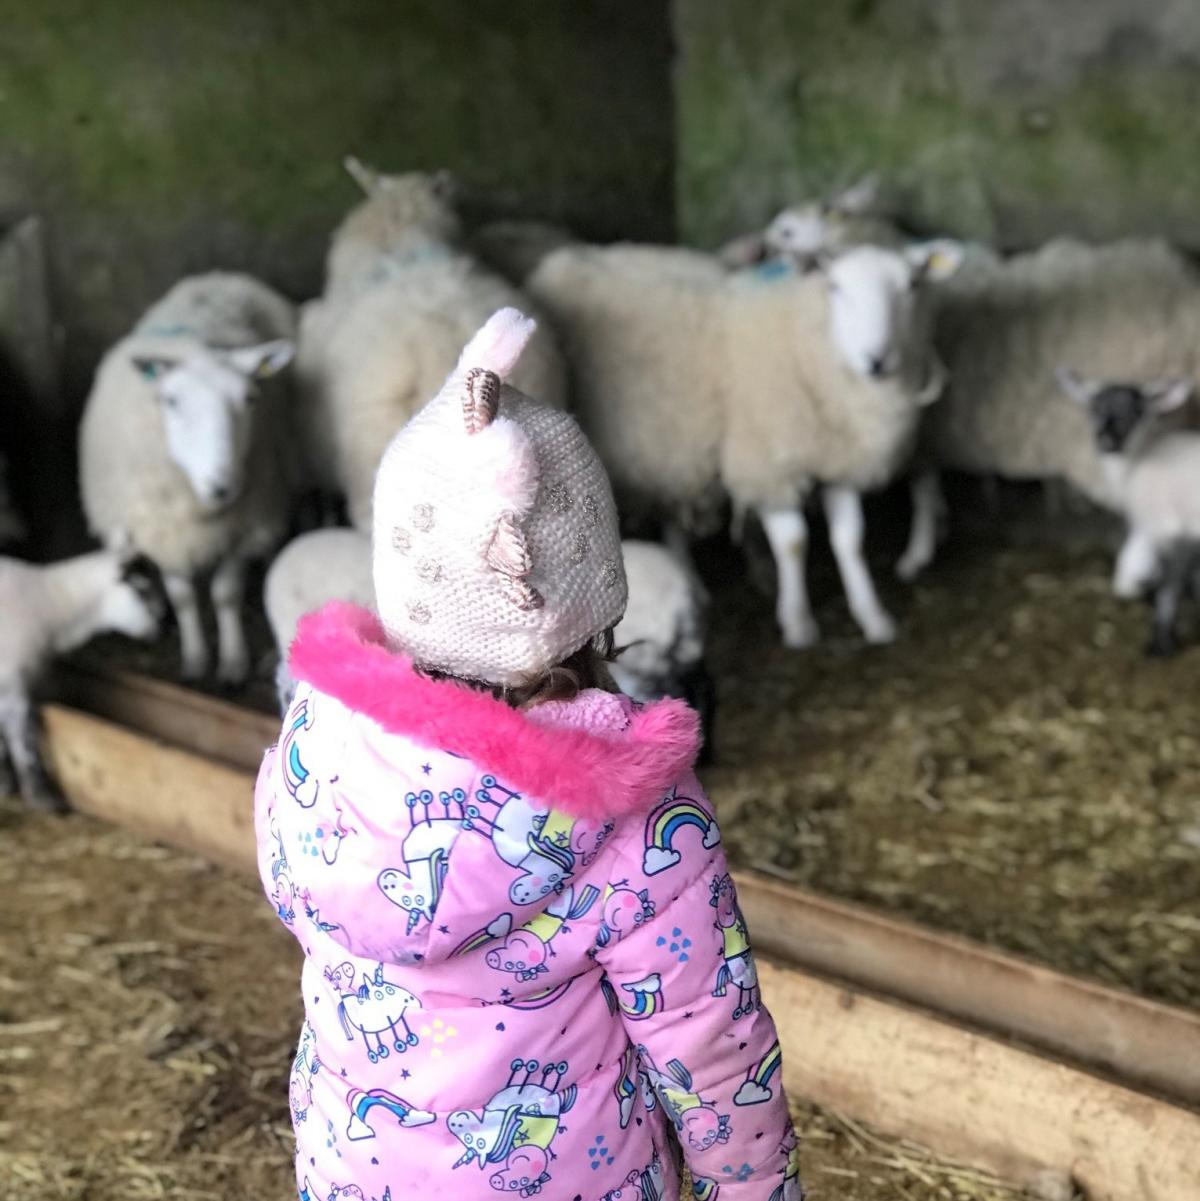 Janette Cameron - Kayleigh always willing to check in on the sheep for her great uncle